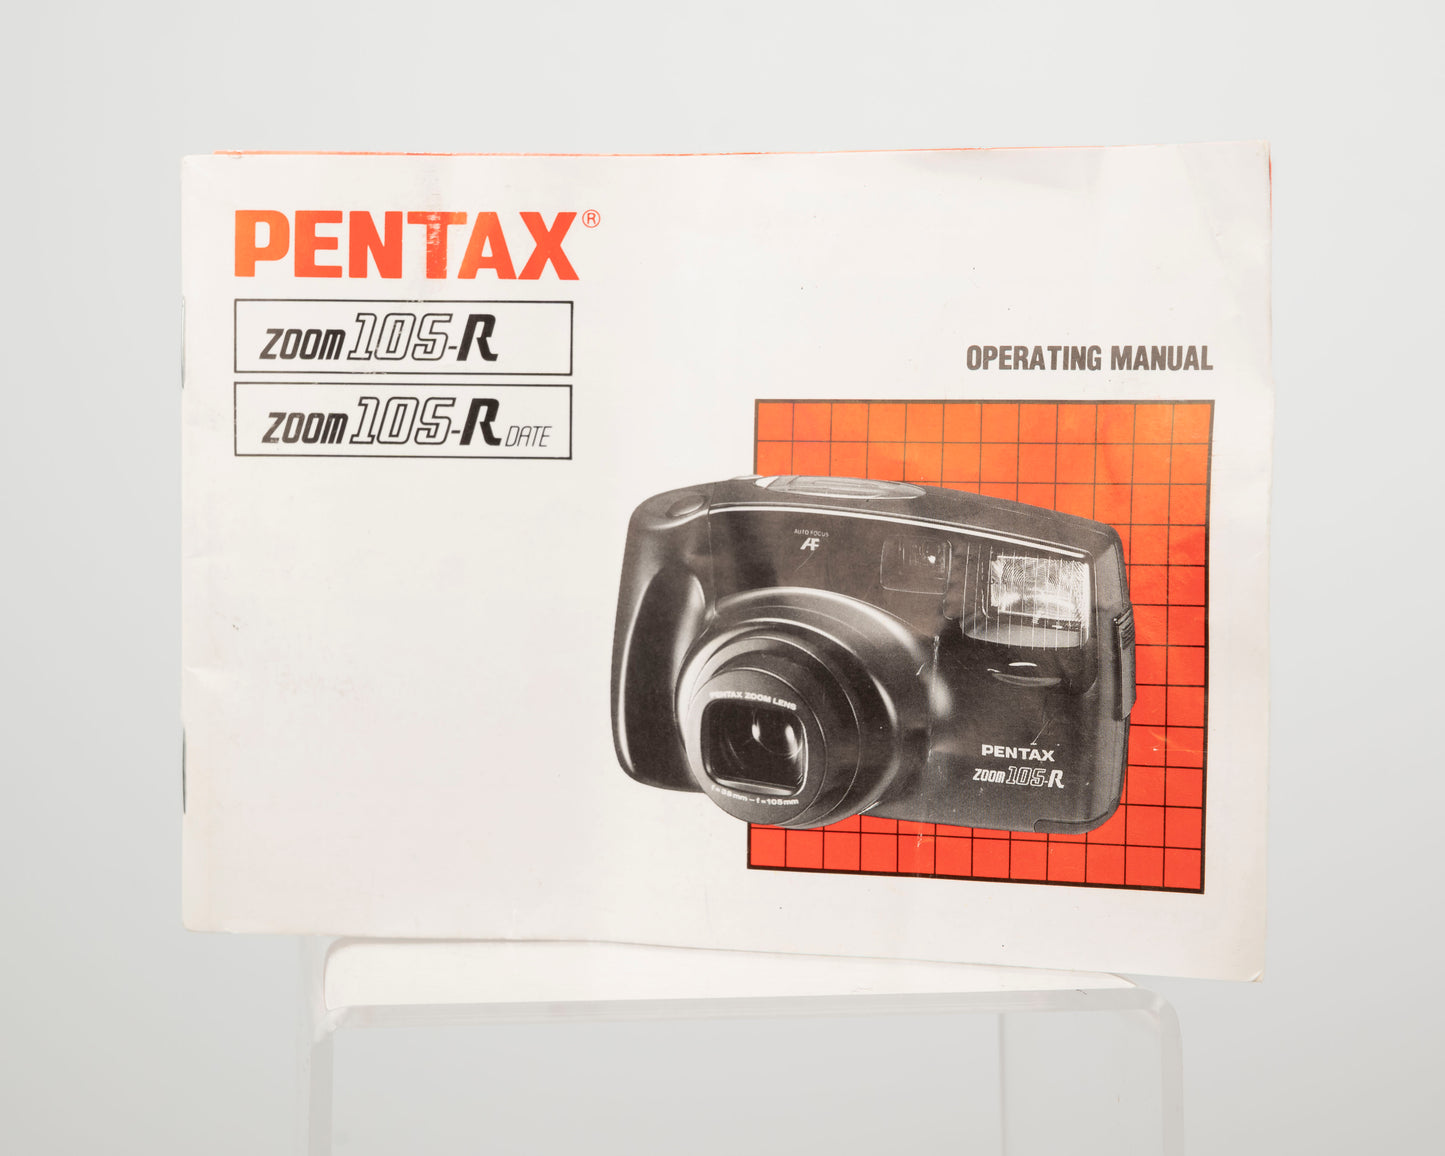 Pentax Zoom 105-R 35mm camera w/case and manual (serial 2483300)